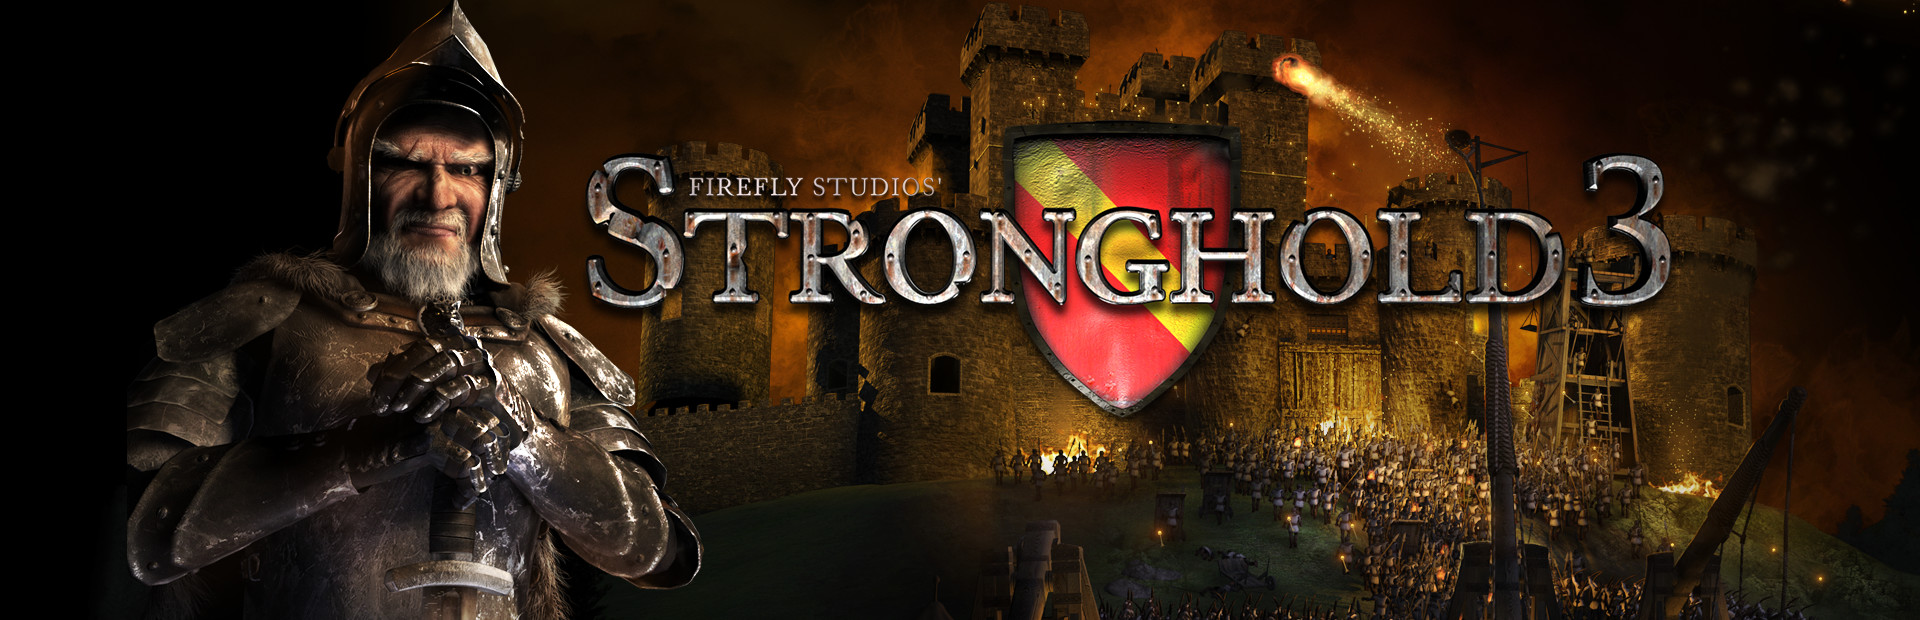 Stronghold 3 (2011)